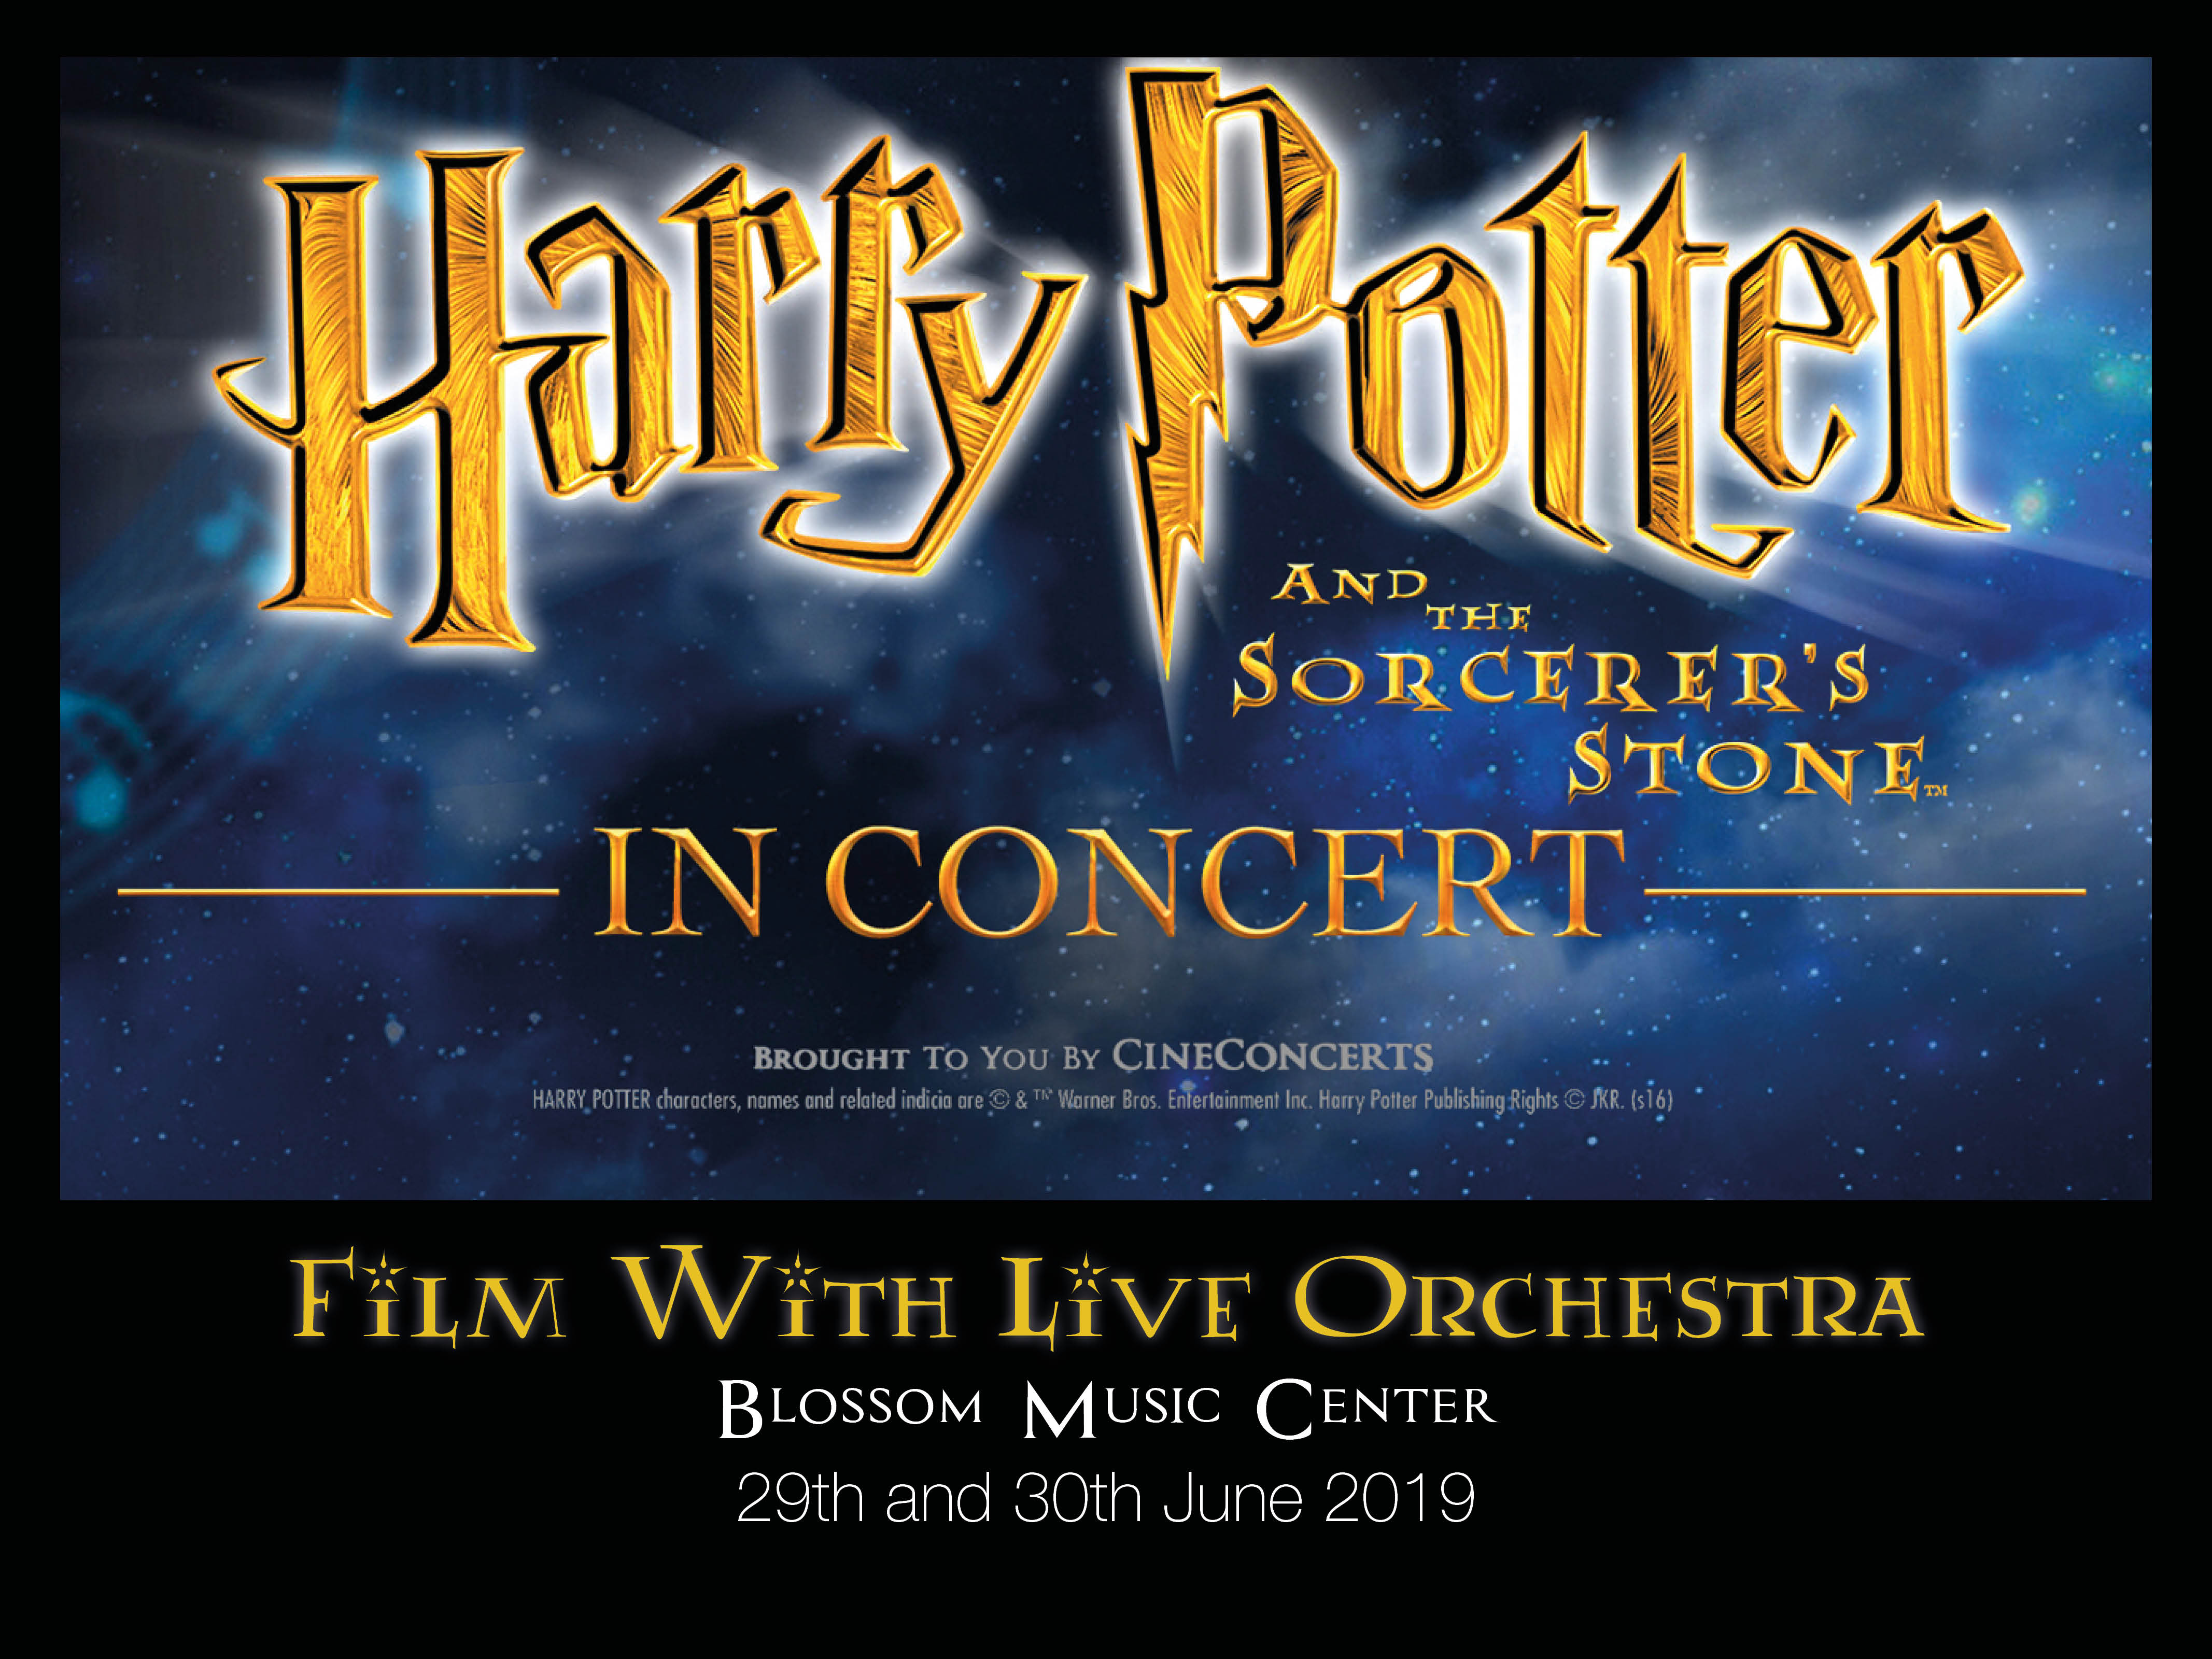 The Cleveland Orchestra: Justin Freer – Harry Potter and The Sorcerer's Stone – Film With Live Orchestra